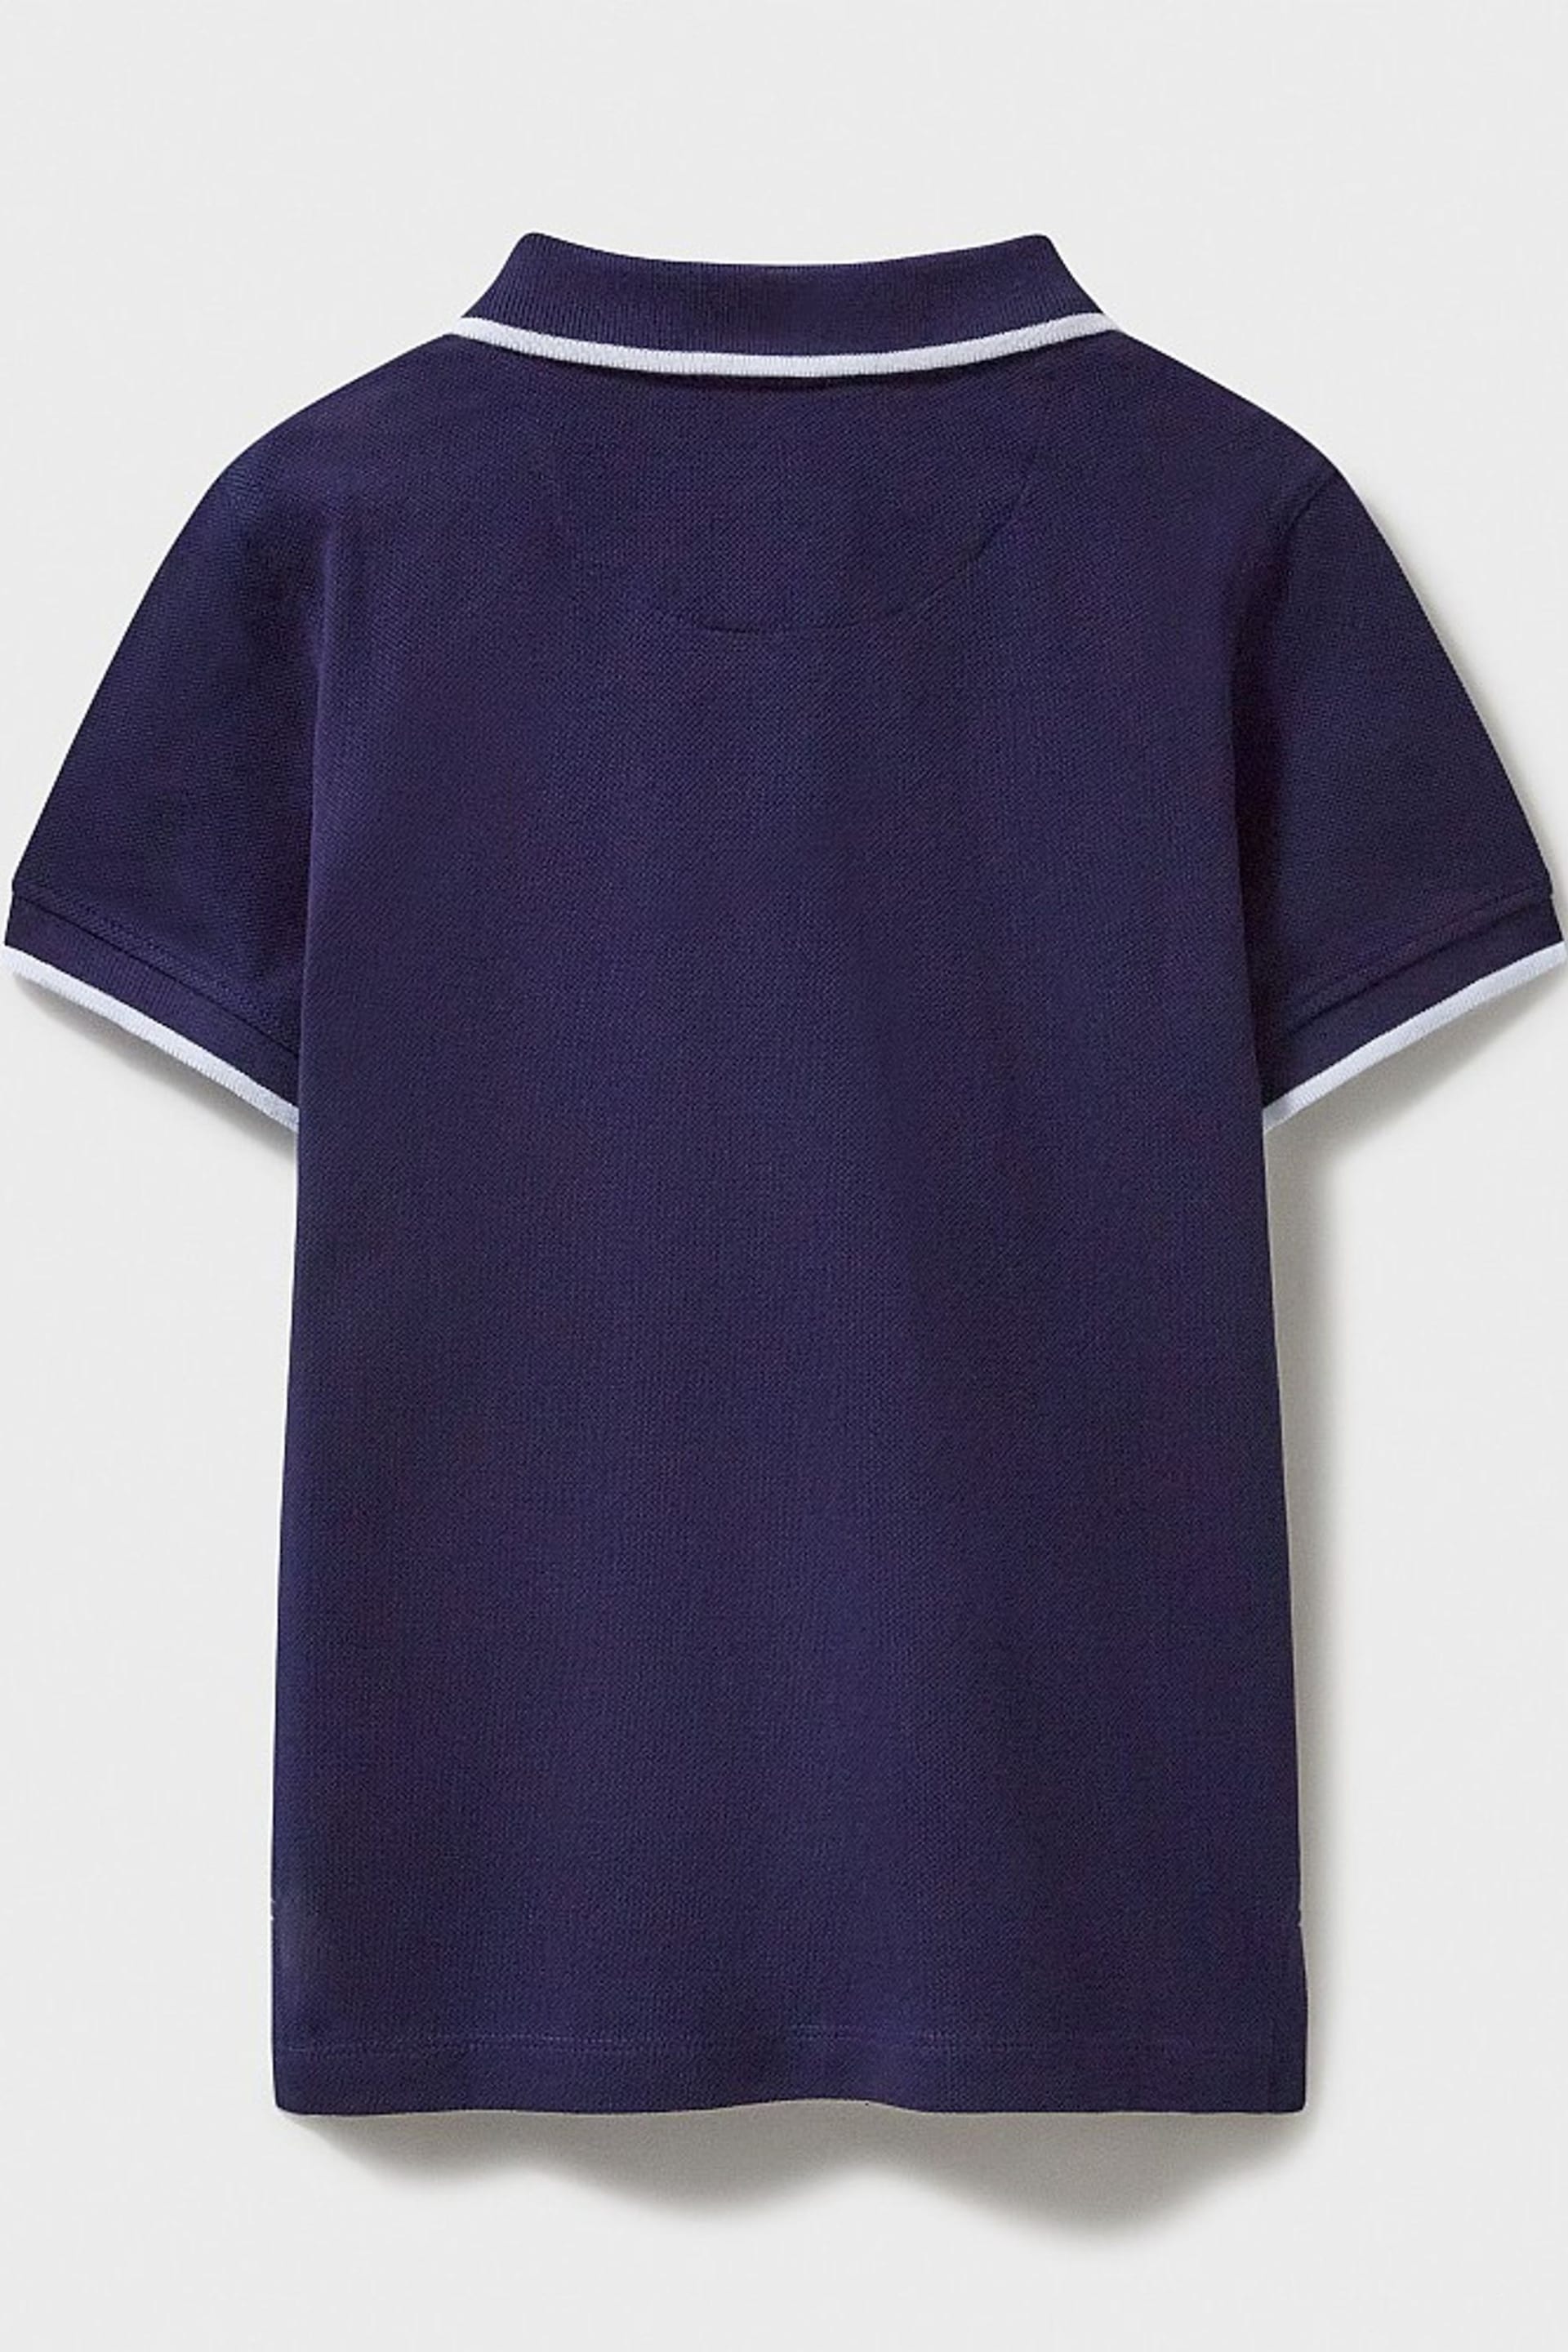 Crew Clothing Tipped Pique Short Sleeve Polo Shirt - Image 2 of 3